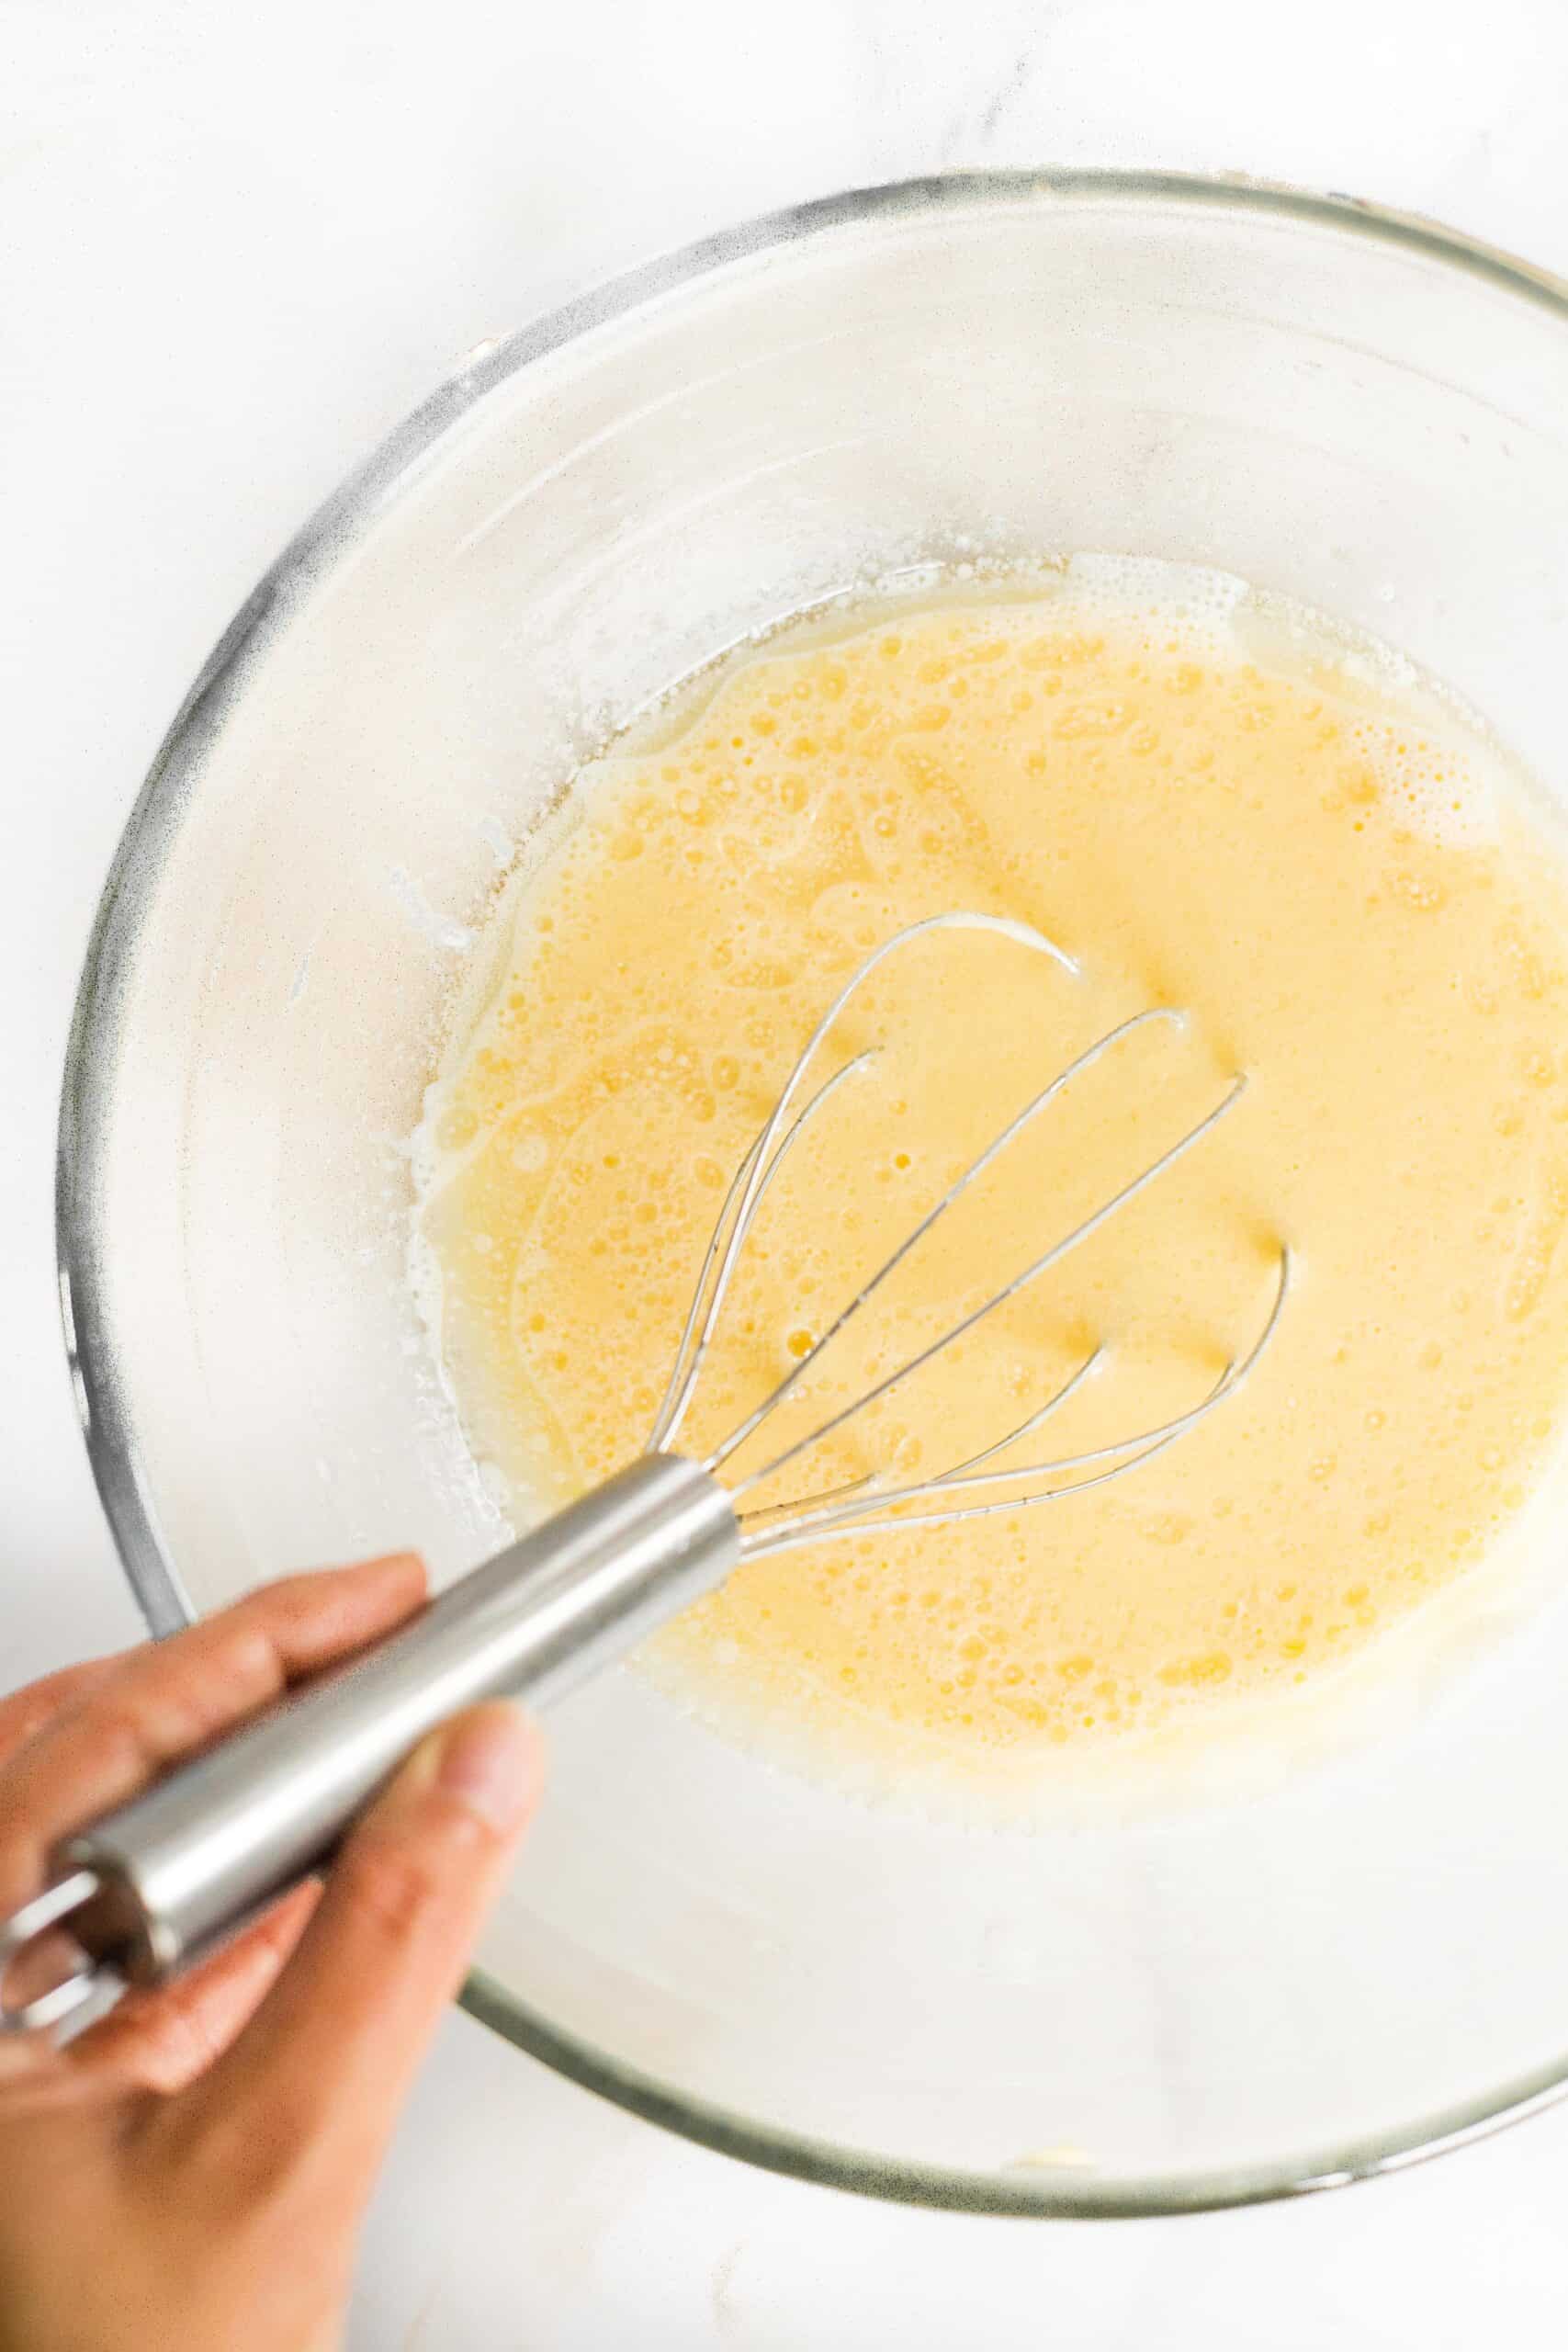 Whisking a pale yellow liquid mixture in a glass bowl.